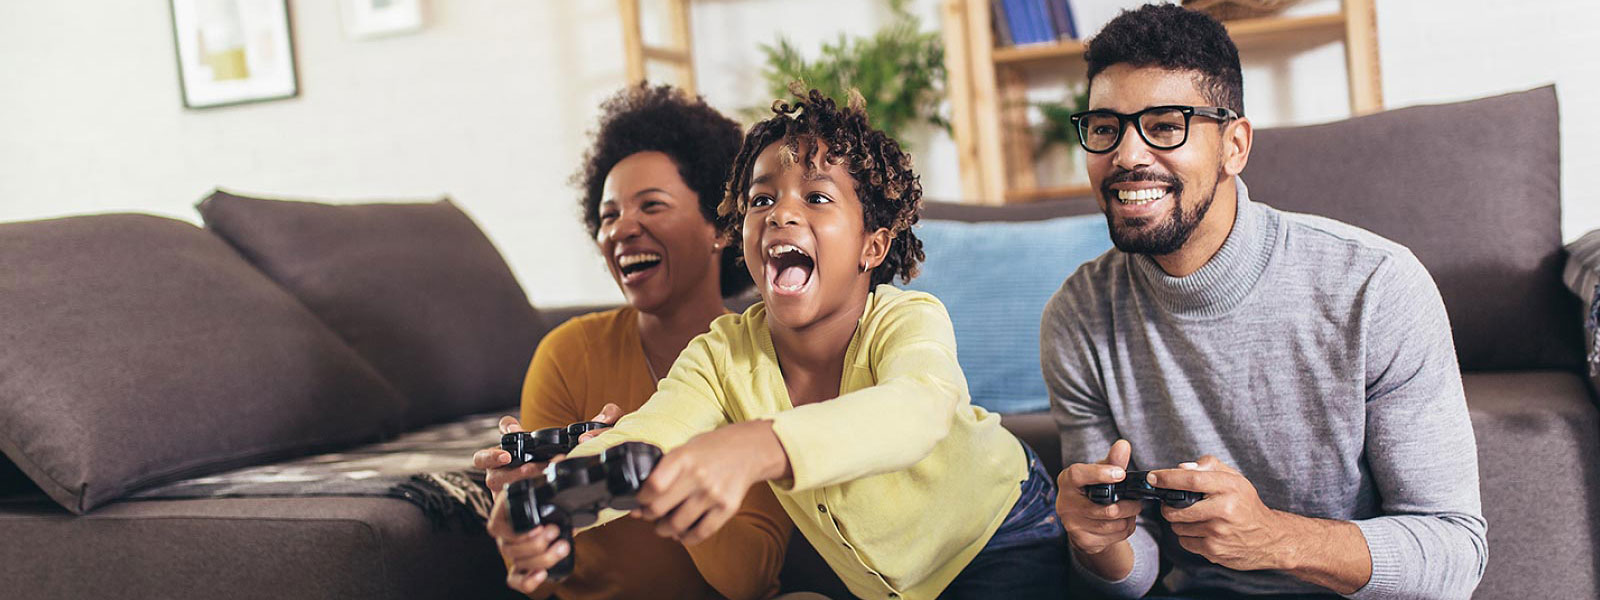 Child and parents playing video game in living room